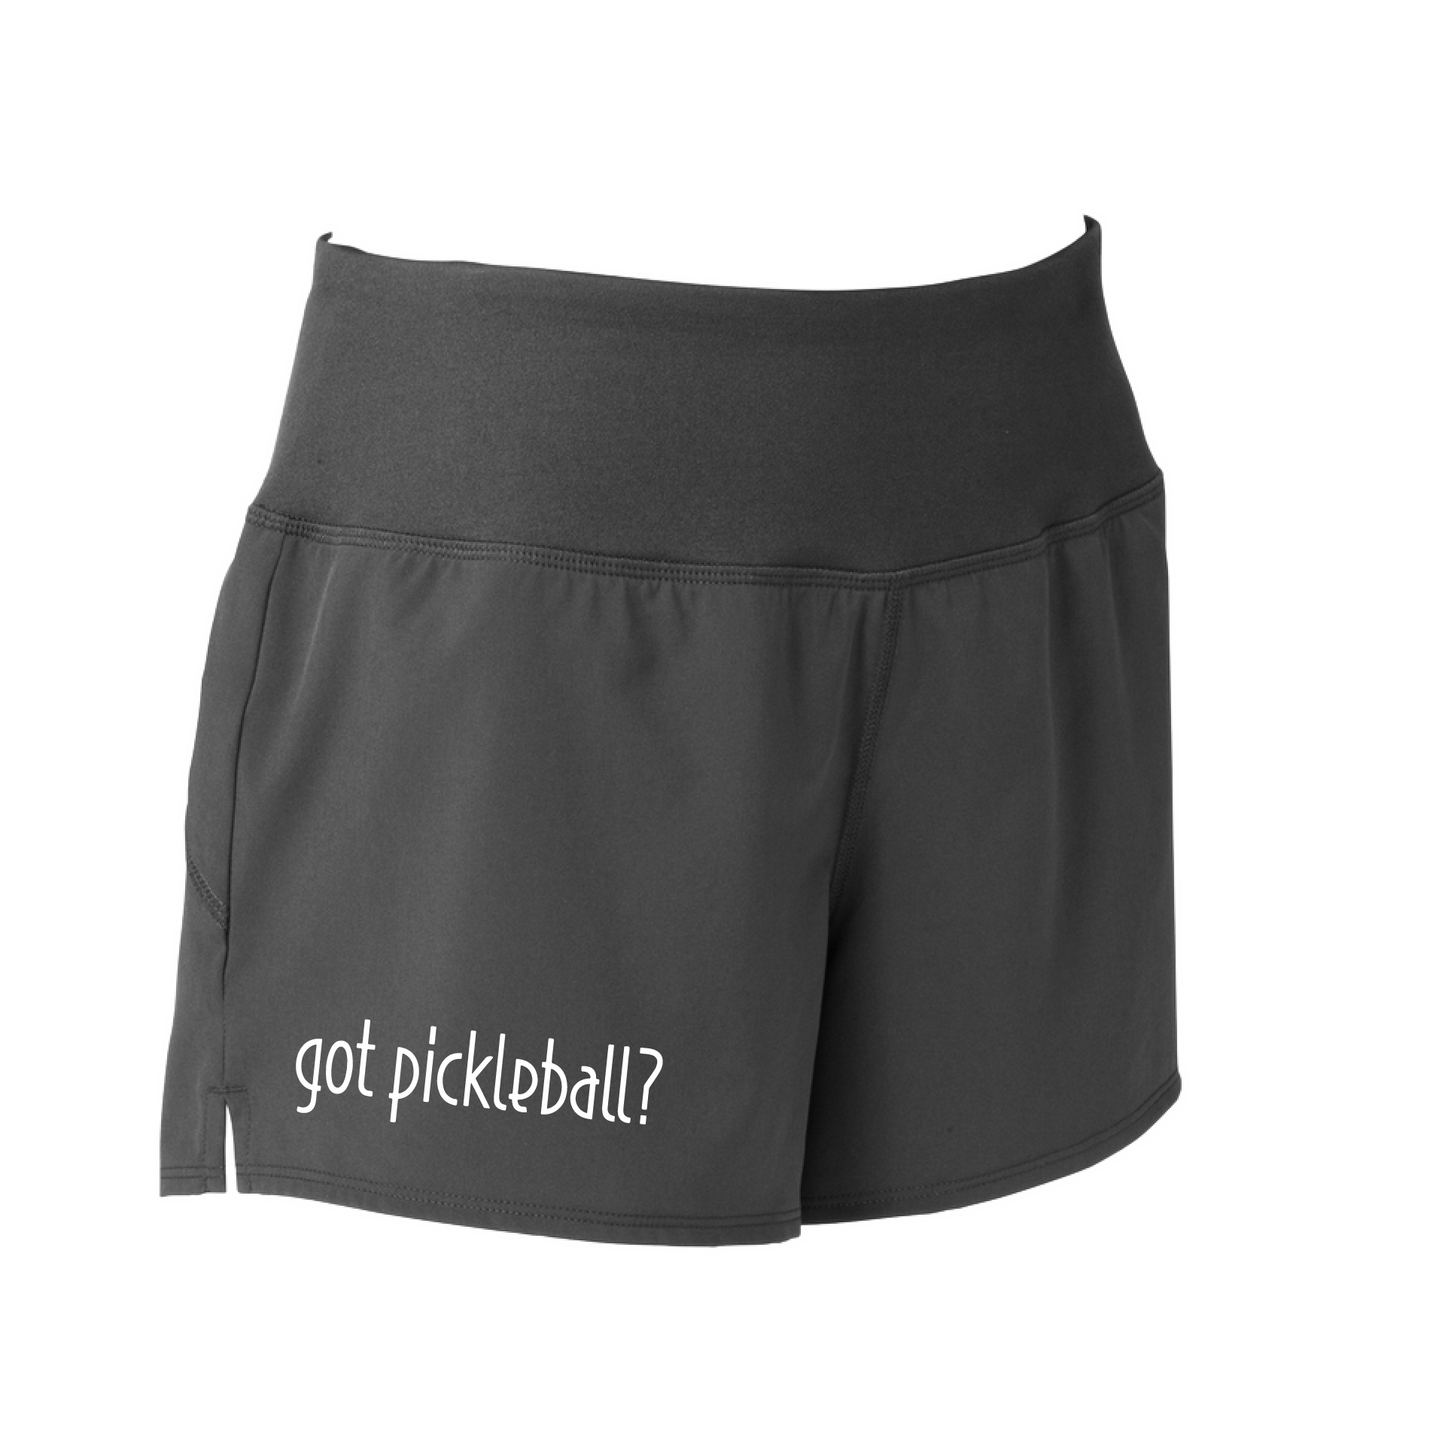 Pickleball Shorts Design: Got Pickleball?  Sport Tek women’s repeat shorts come with built-in cell phone pocket on the exterior of the waistband. You can also feel secure knowing that no matter how strenuous the exercise, the shorts will remain in place (it won’t ride up!). These shorts are extremely versatile and trendy. Transition from the Pickleball court to running errands smoothly.